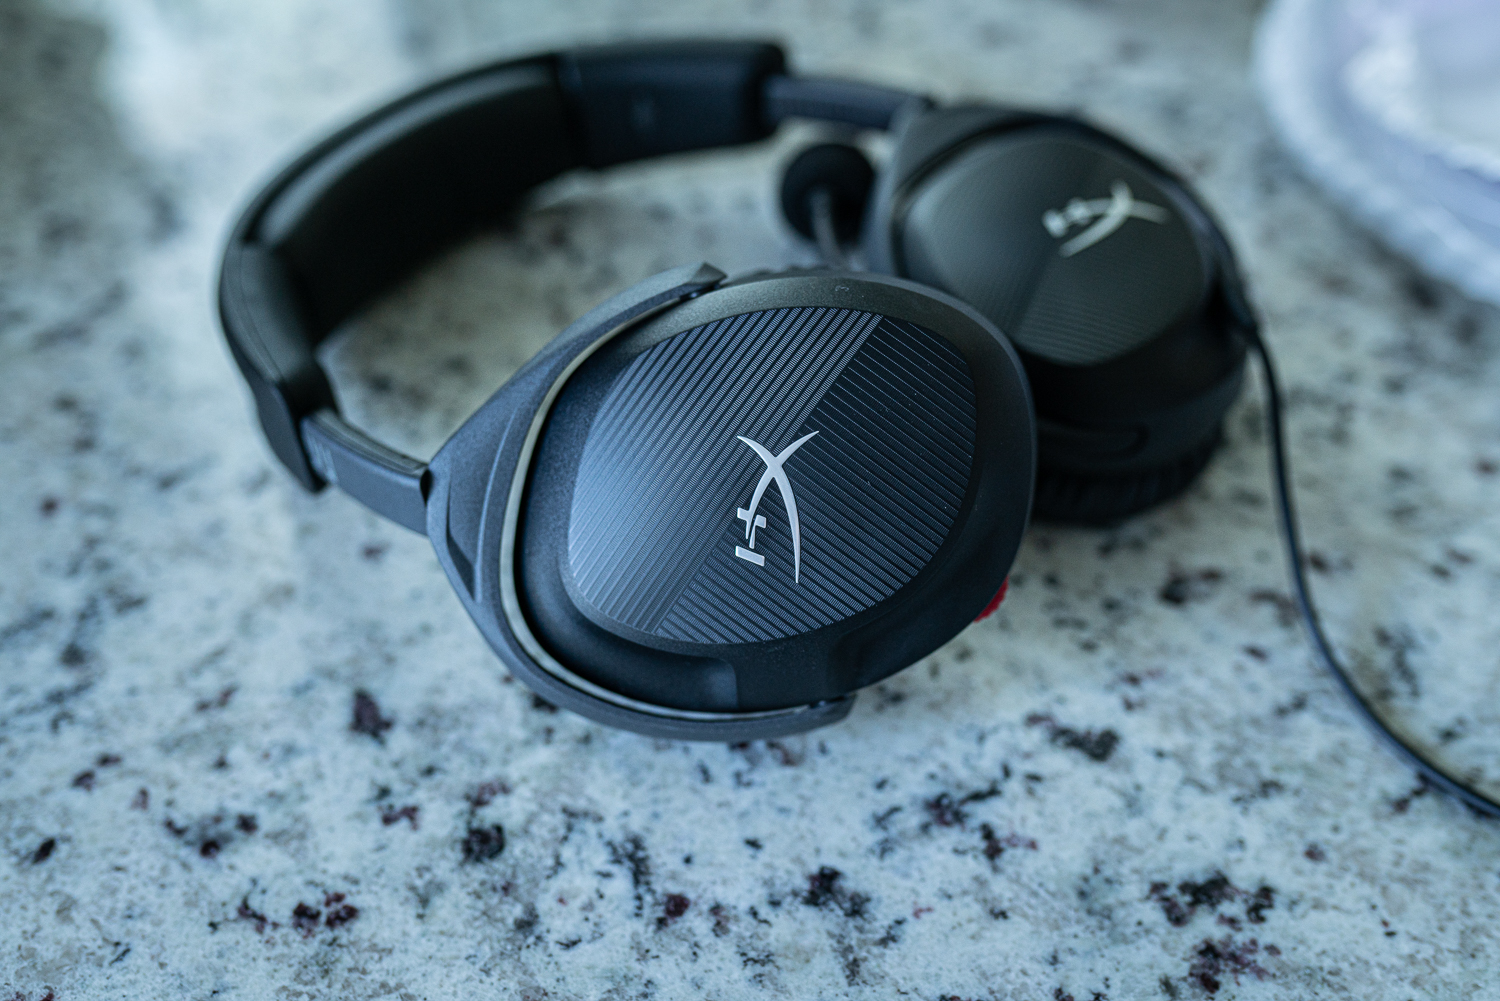 HyperX Cloud II review - STEREO GUIDE